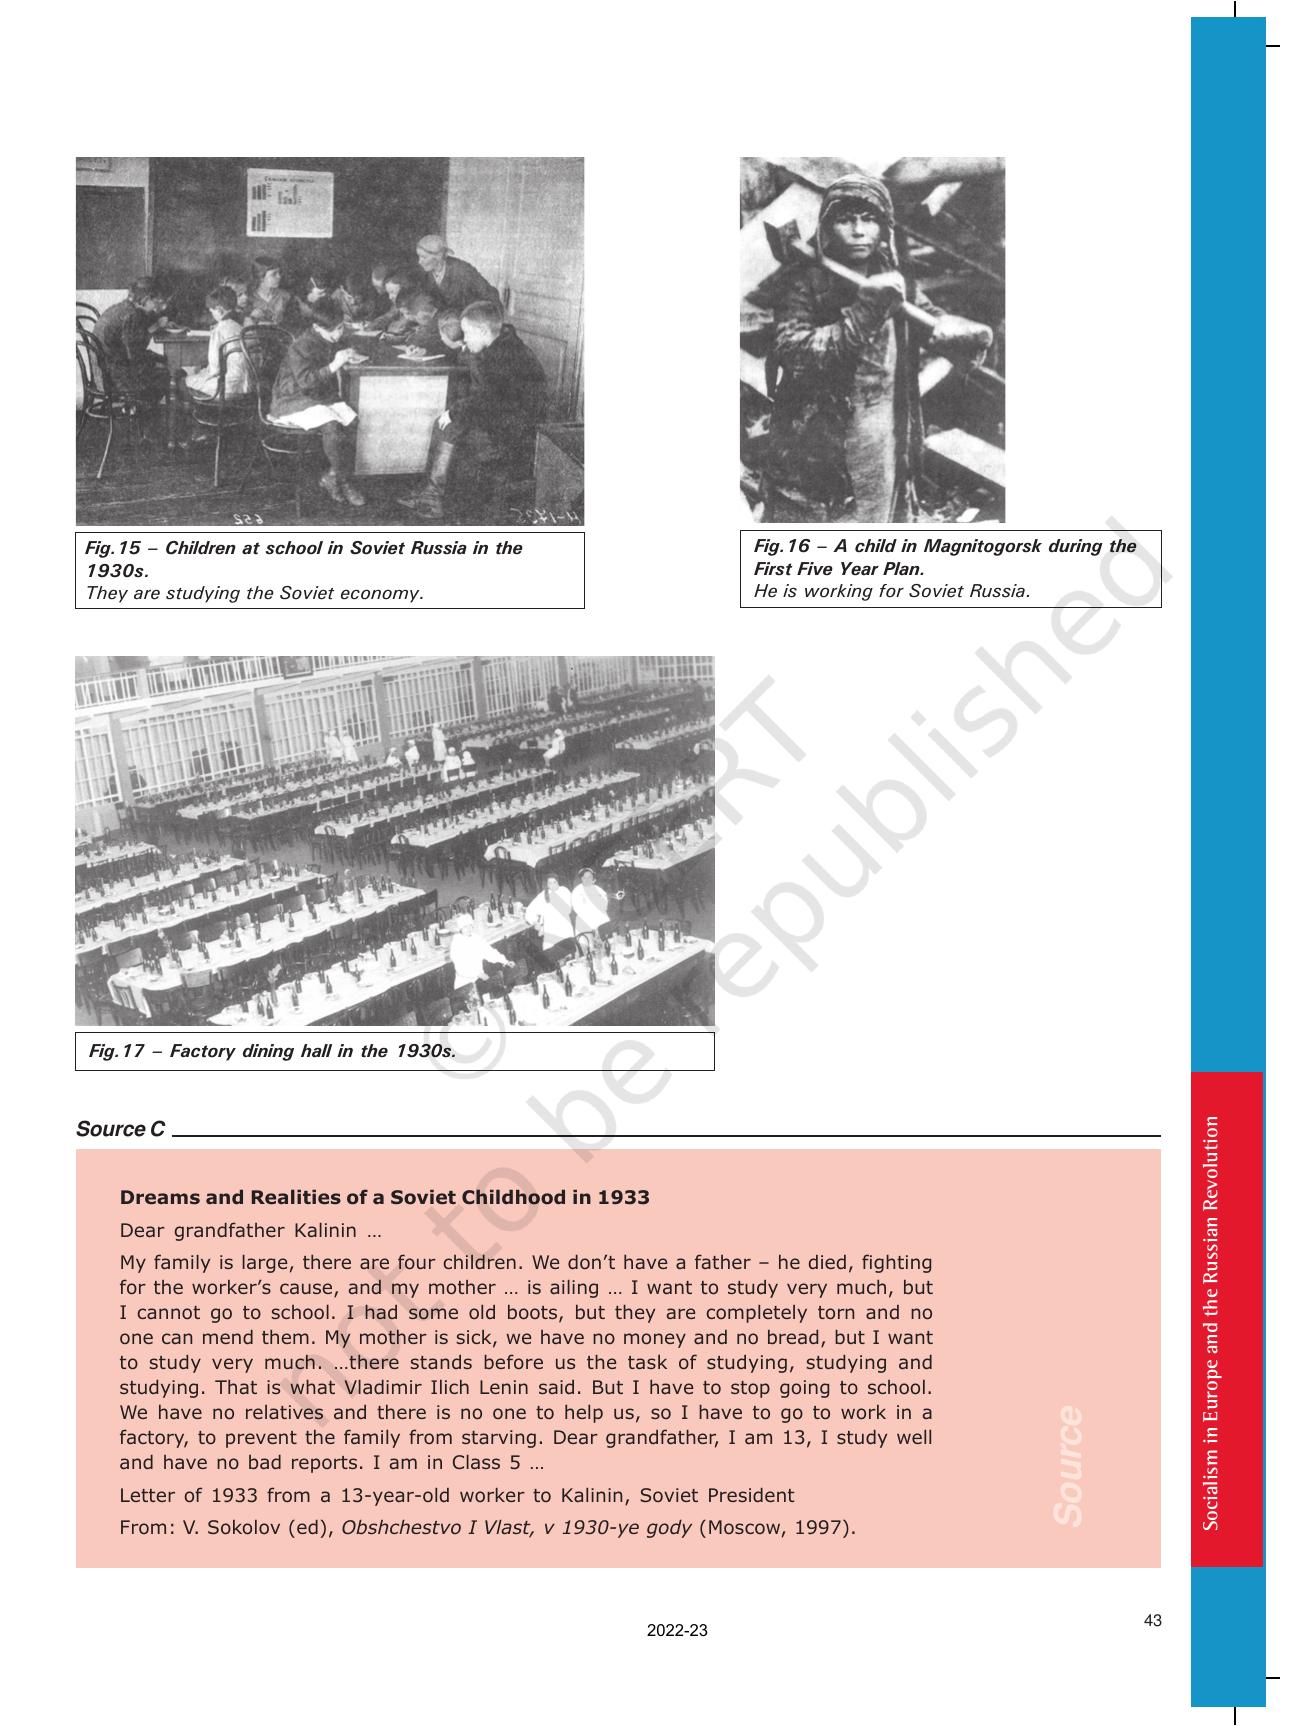 NCERT Book for Class 9 History Chapter 2 Socialism in Europe and the Russian Revolution - Page 19